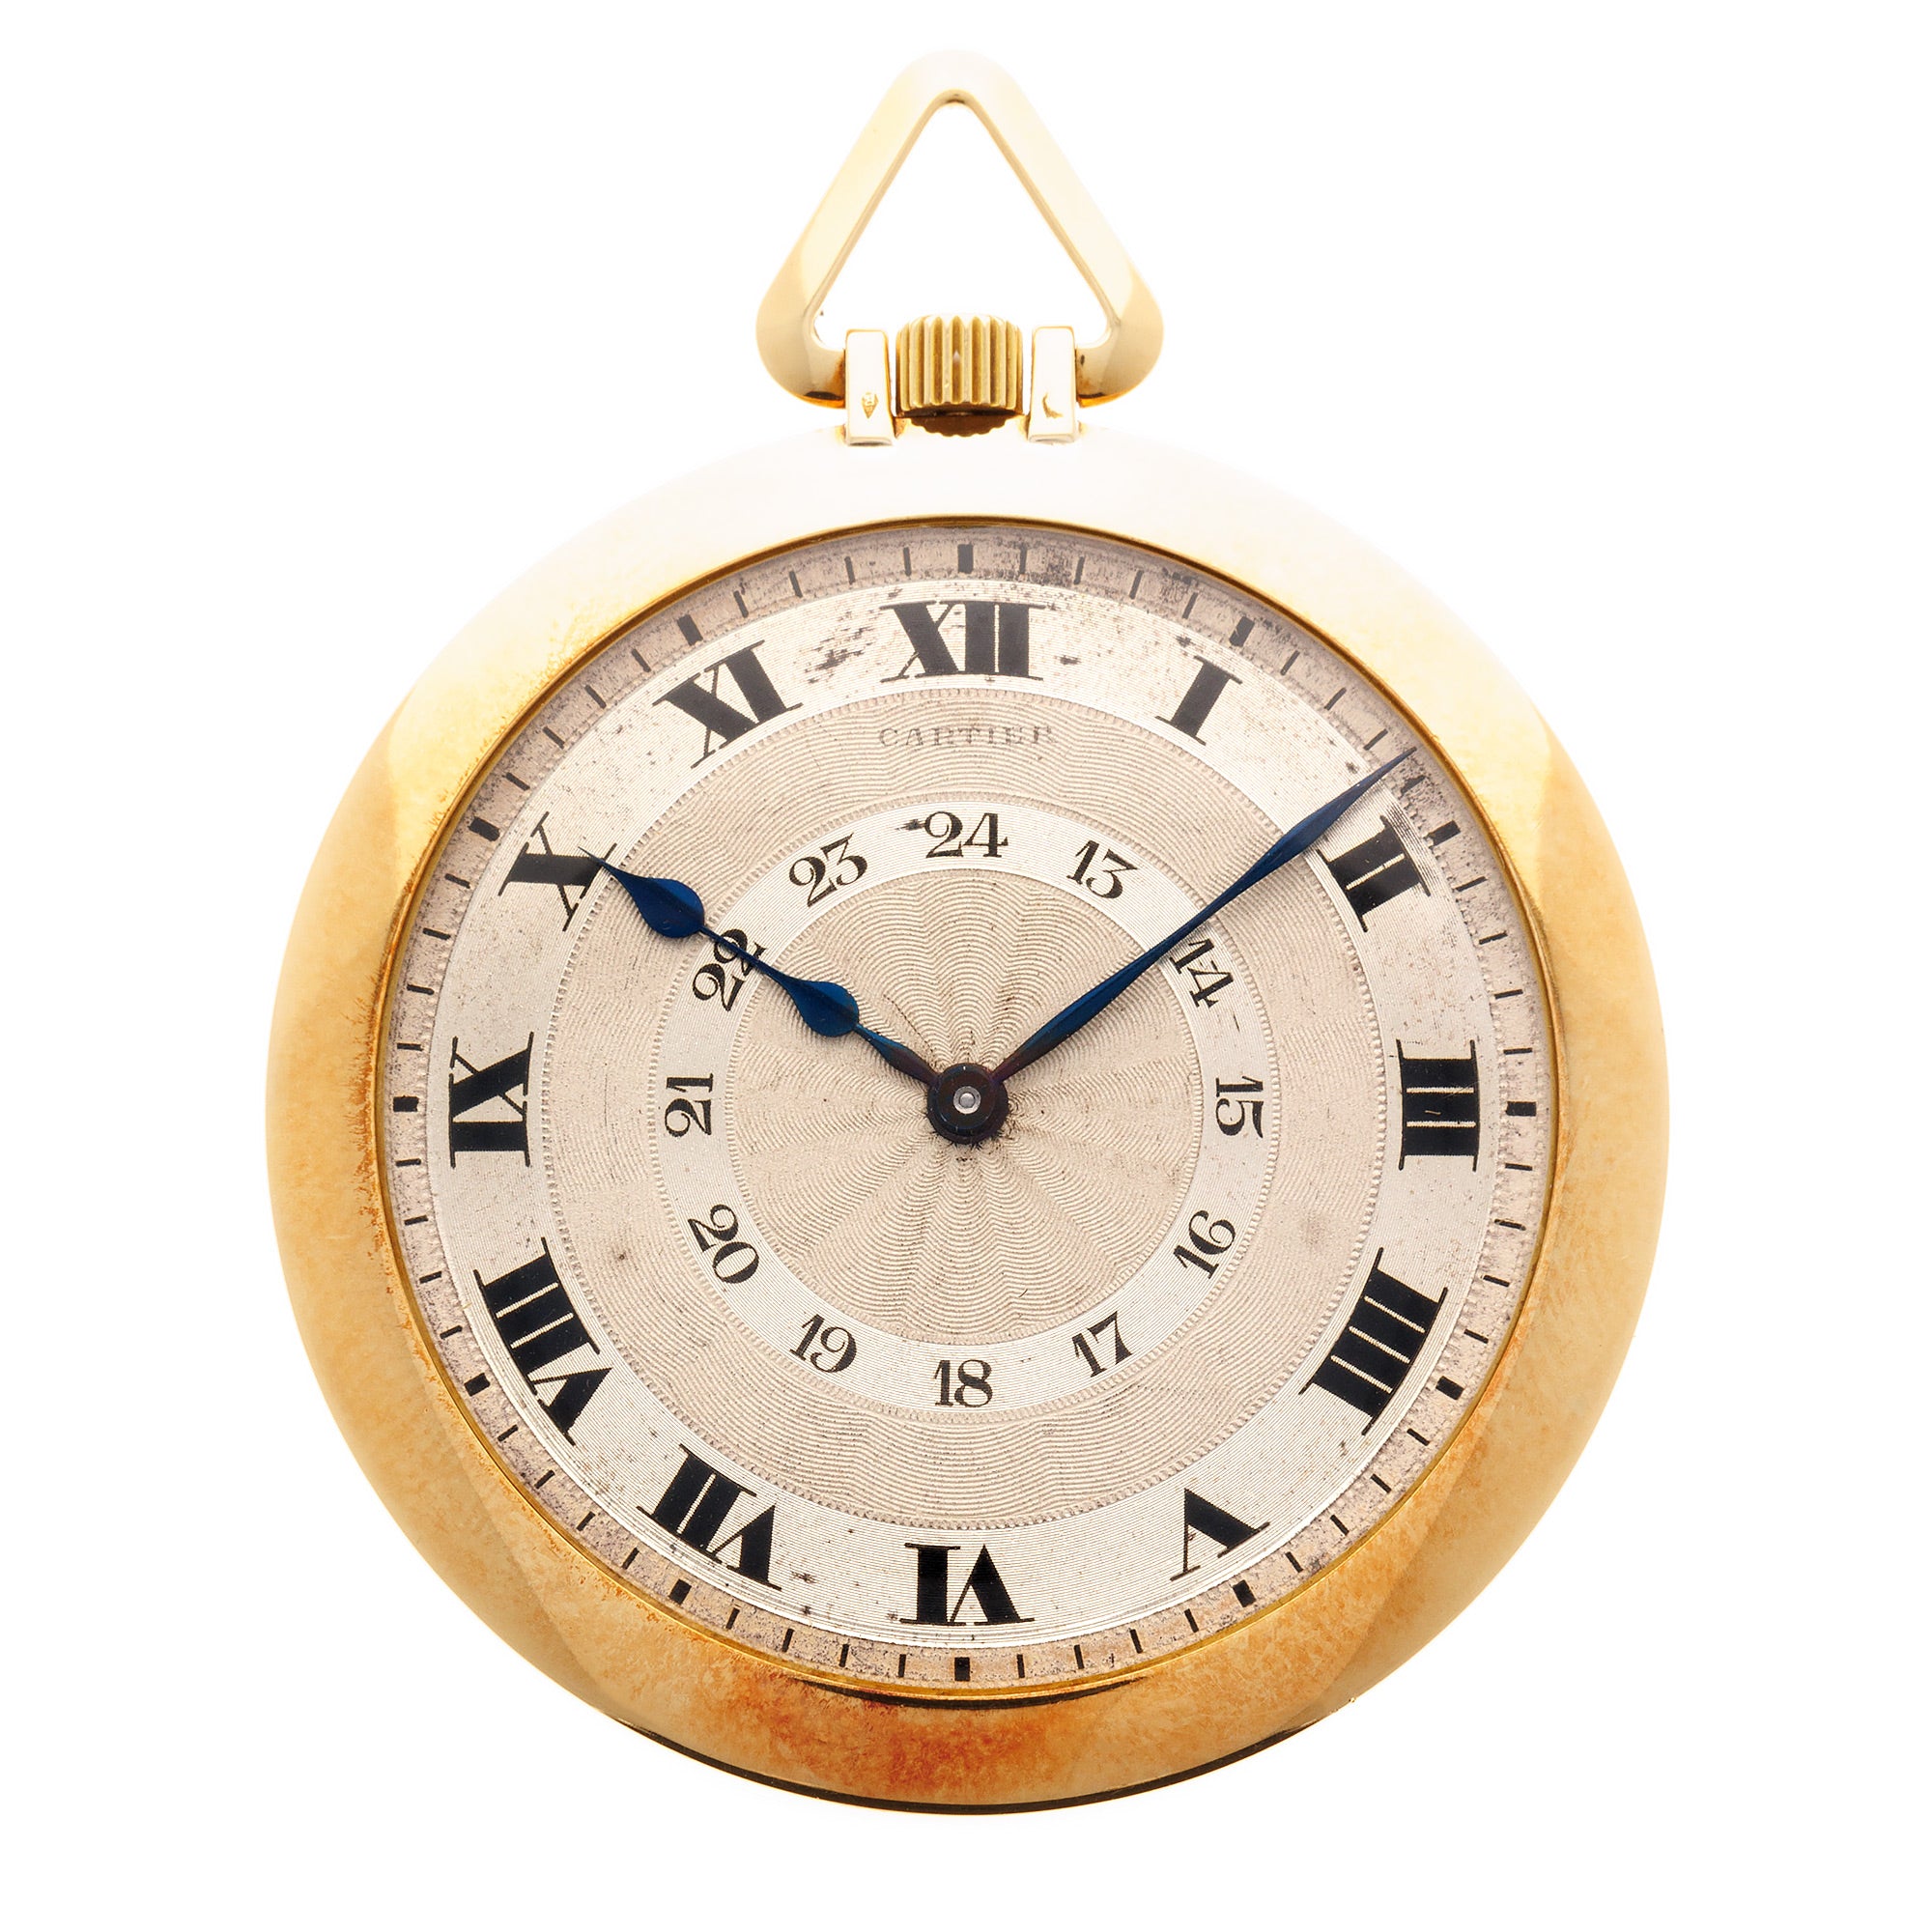 Cartier - Cartier Breguet and Roman Numeral Pocket Watch with EWC Movement - The Keystone Watches